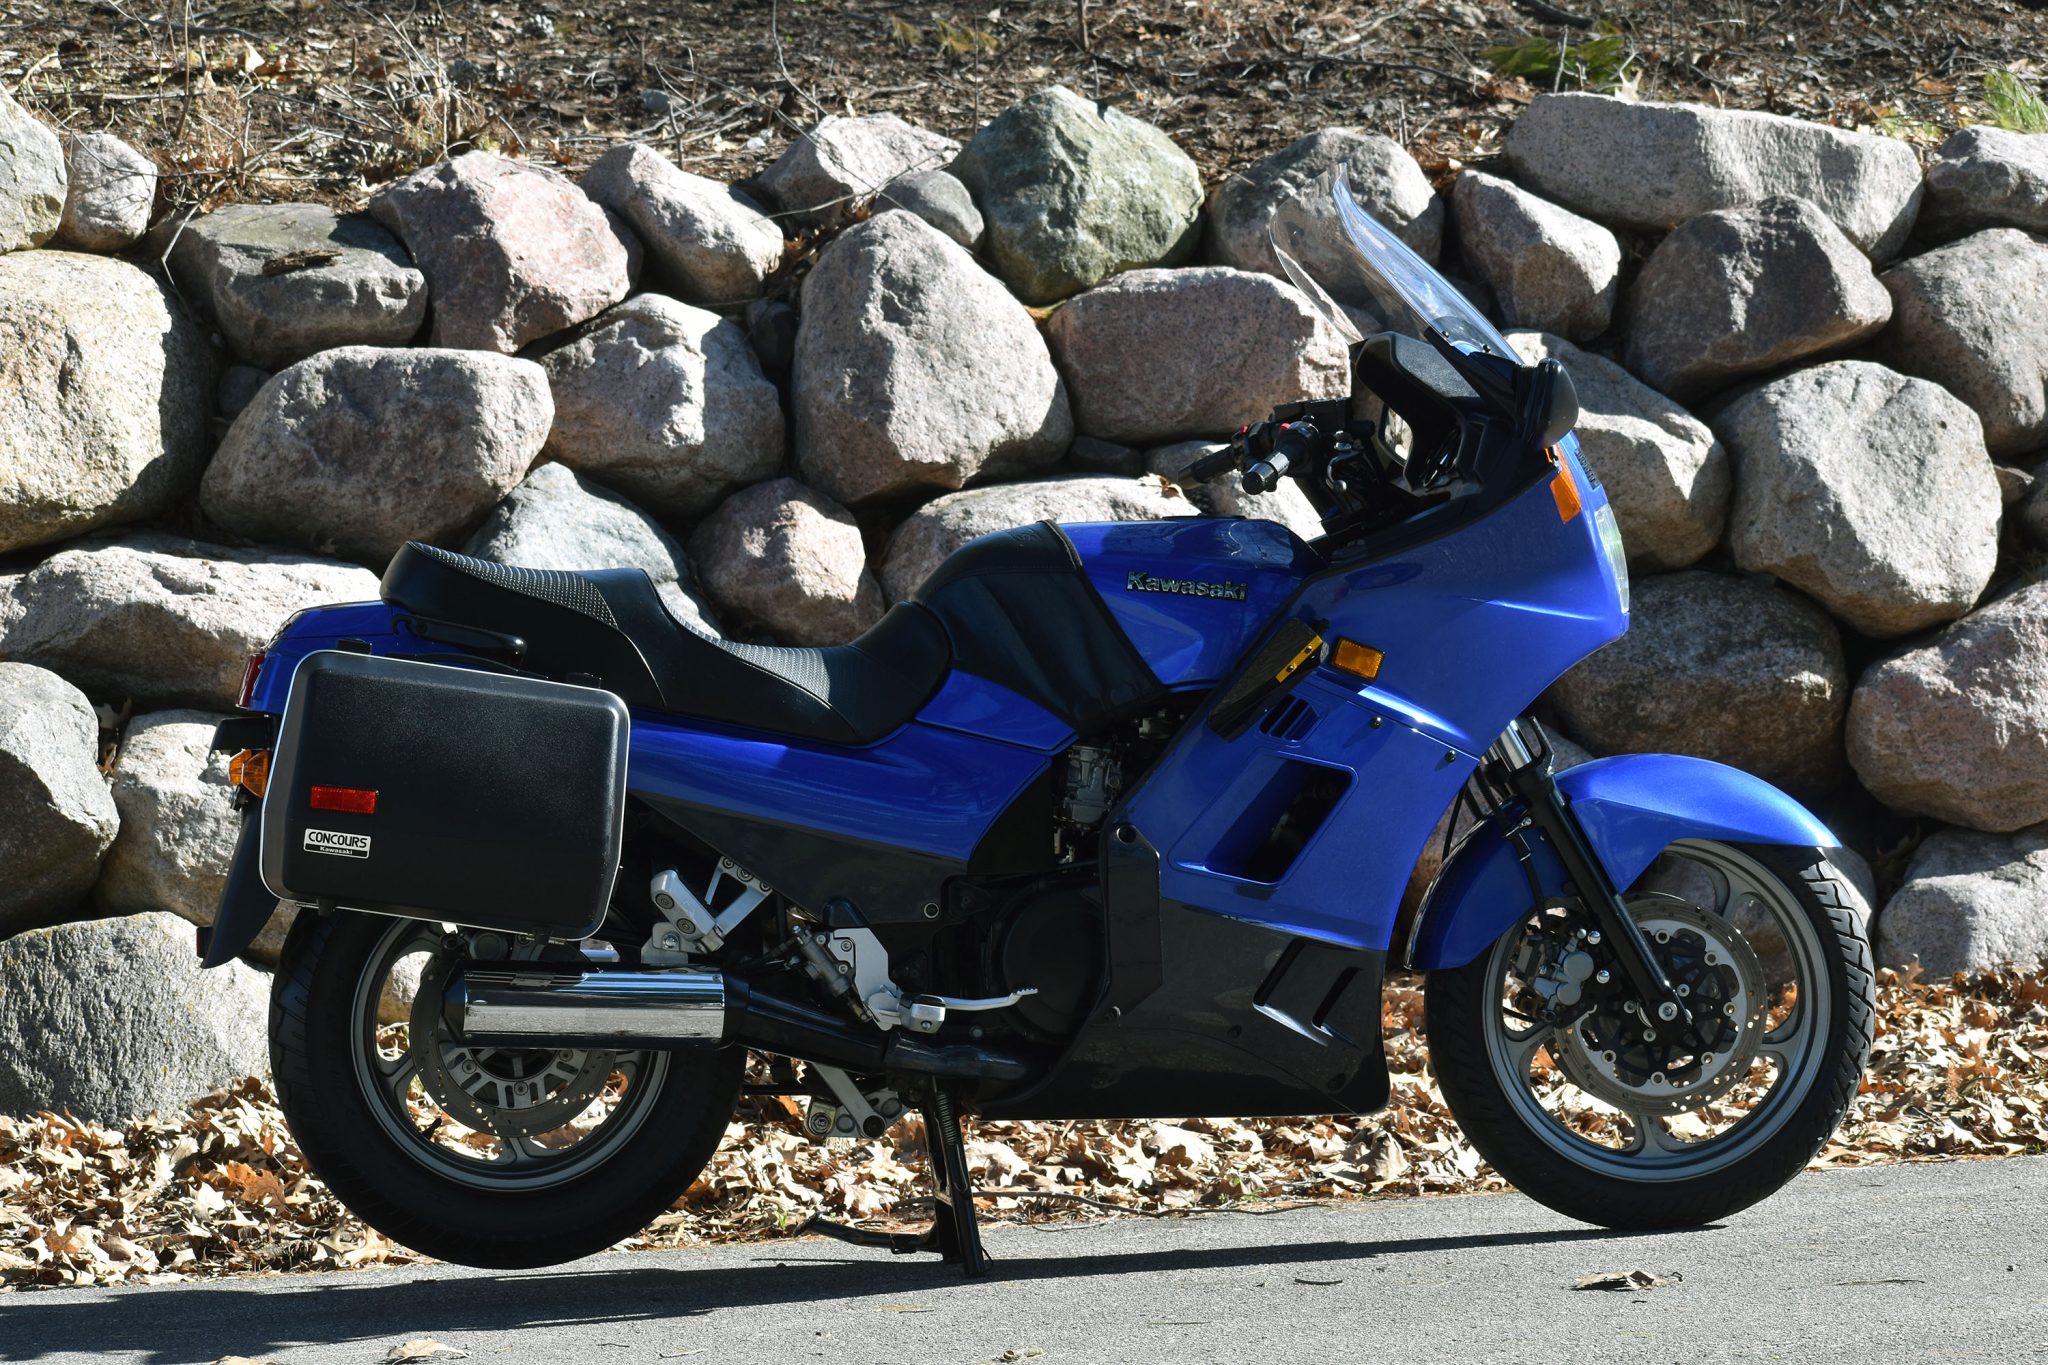 Used 2001 Kawasaki ZG1000 Concours Review